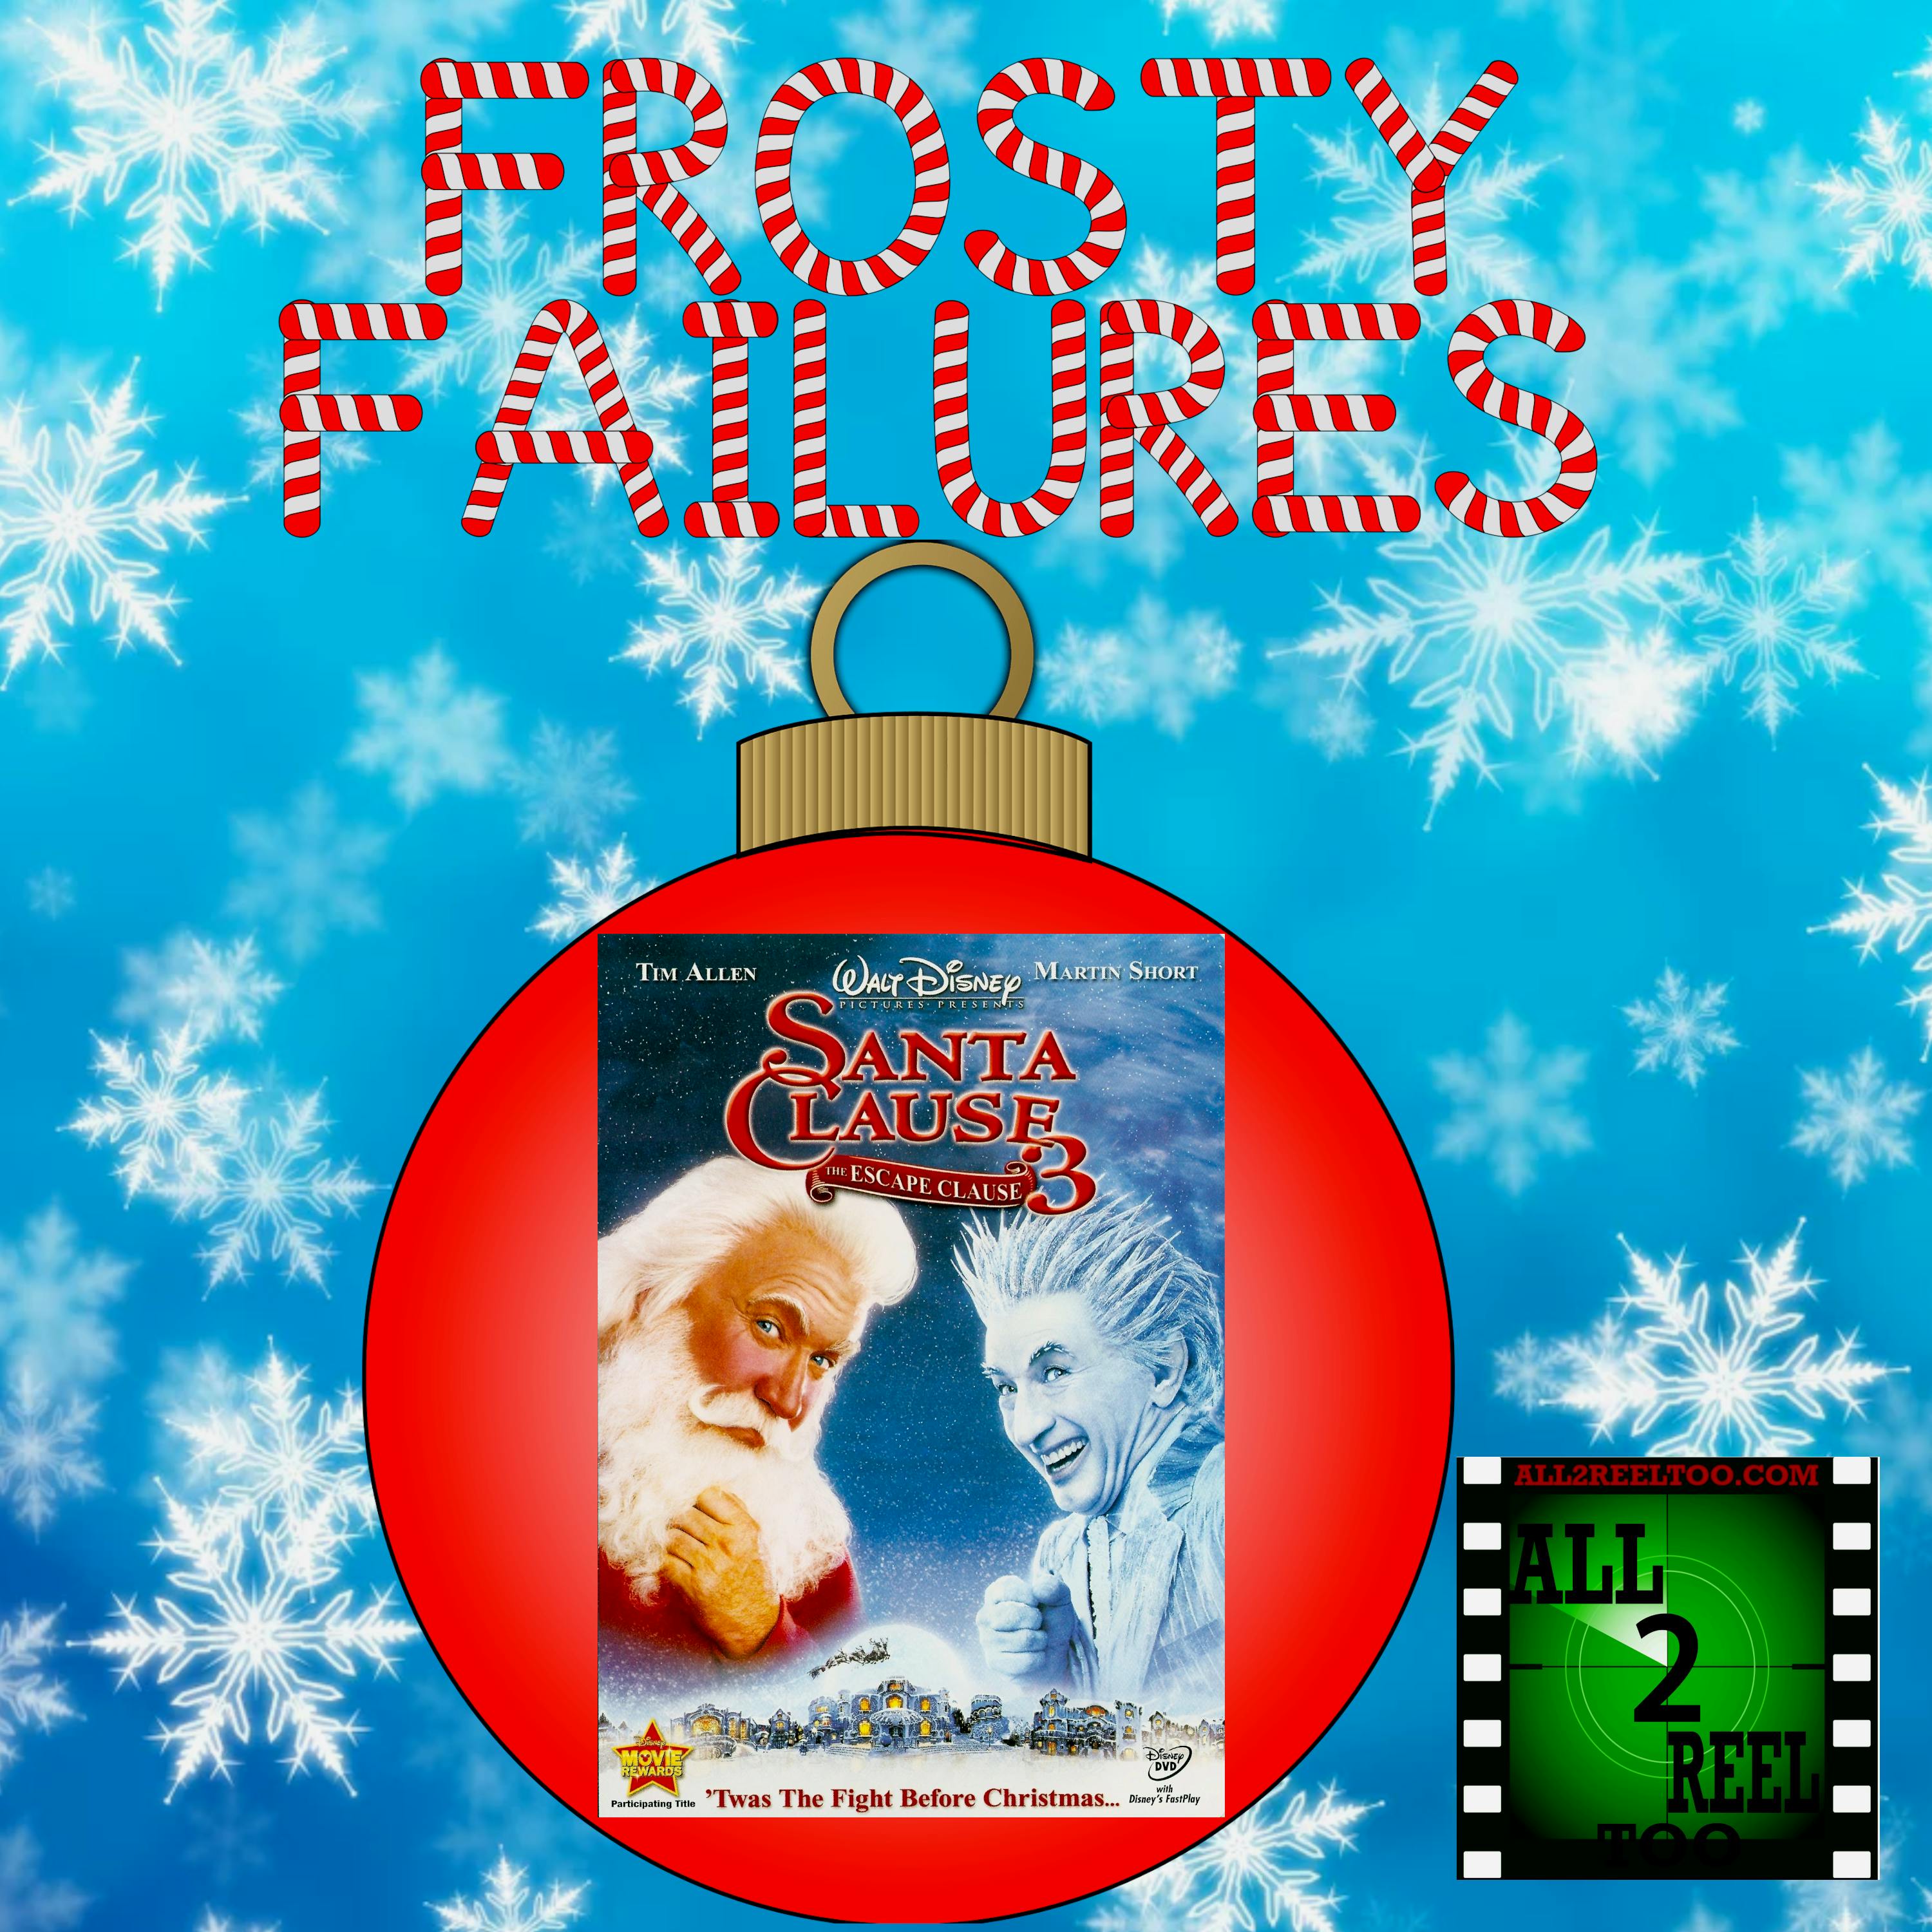 The Santa Clause 3: The Escape Clause (2006) - FROSTY FAILURES REVIEW